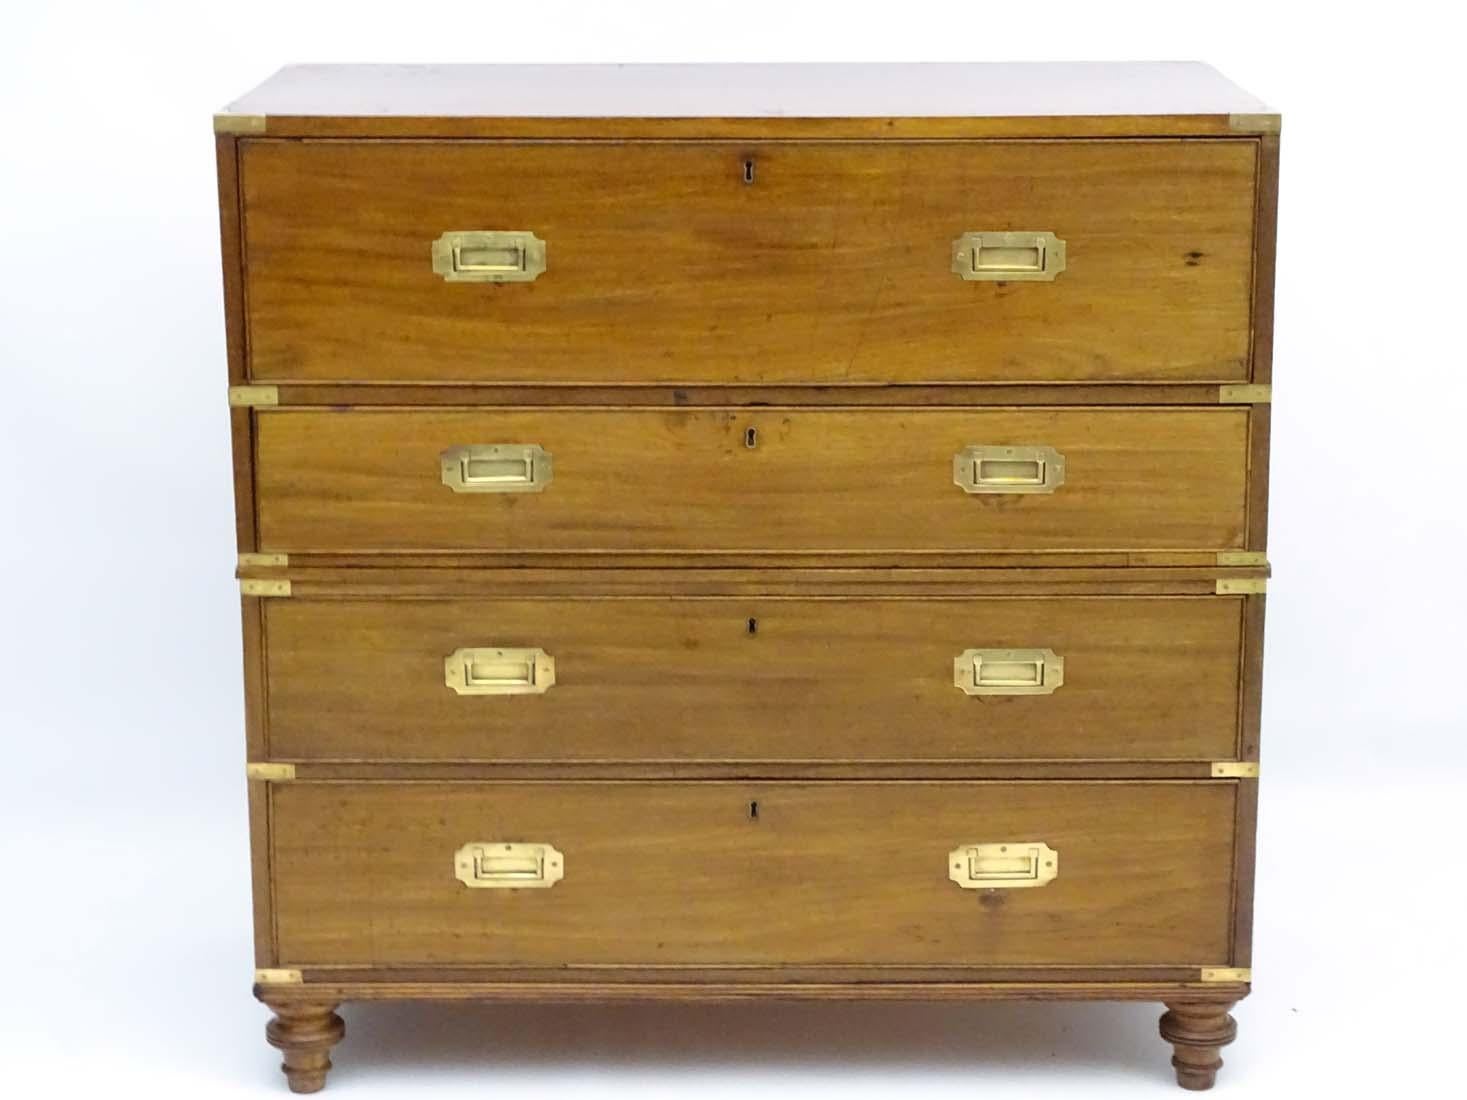 Mahogany Gillows of Lancaster Campaign Chest of Drawers Secretaire Antique, circa 1850